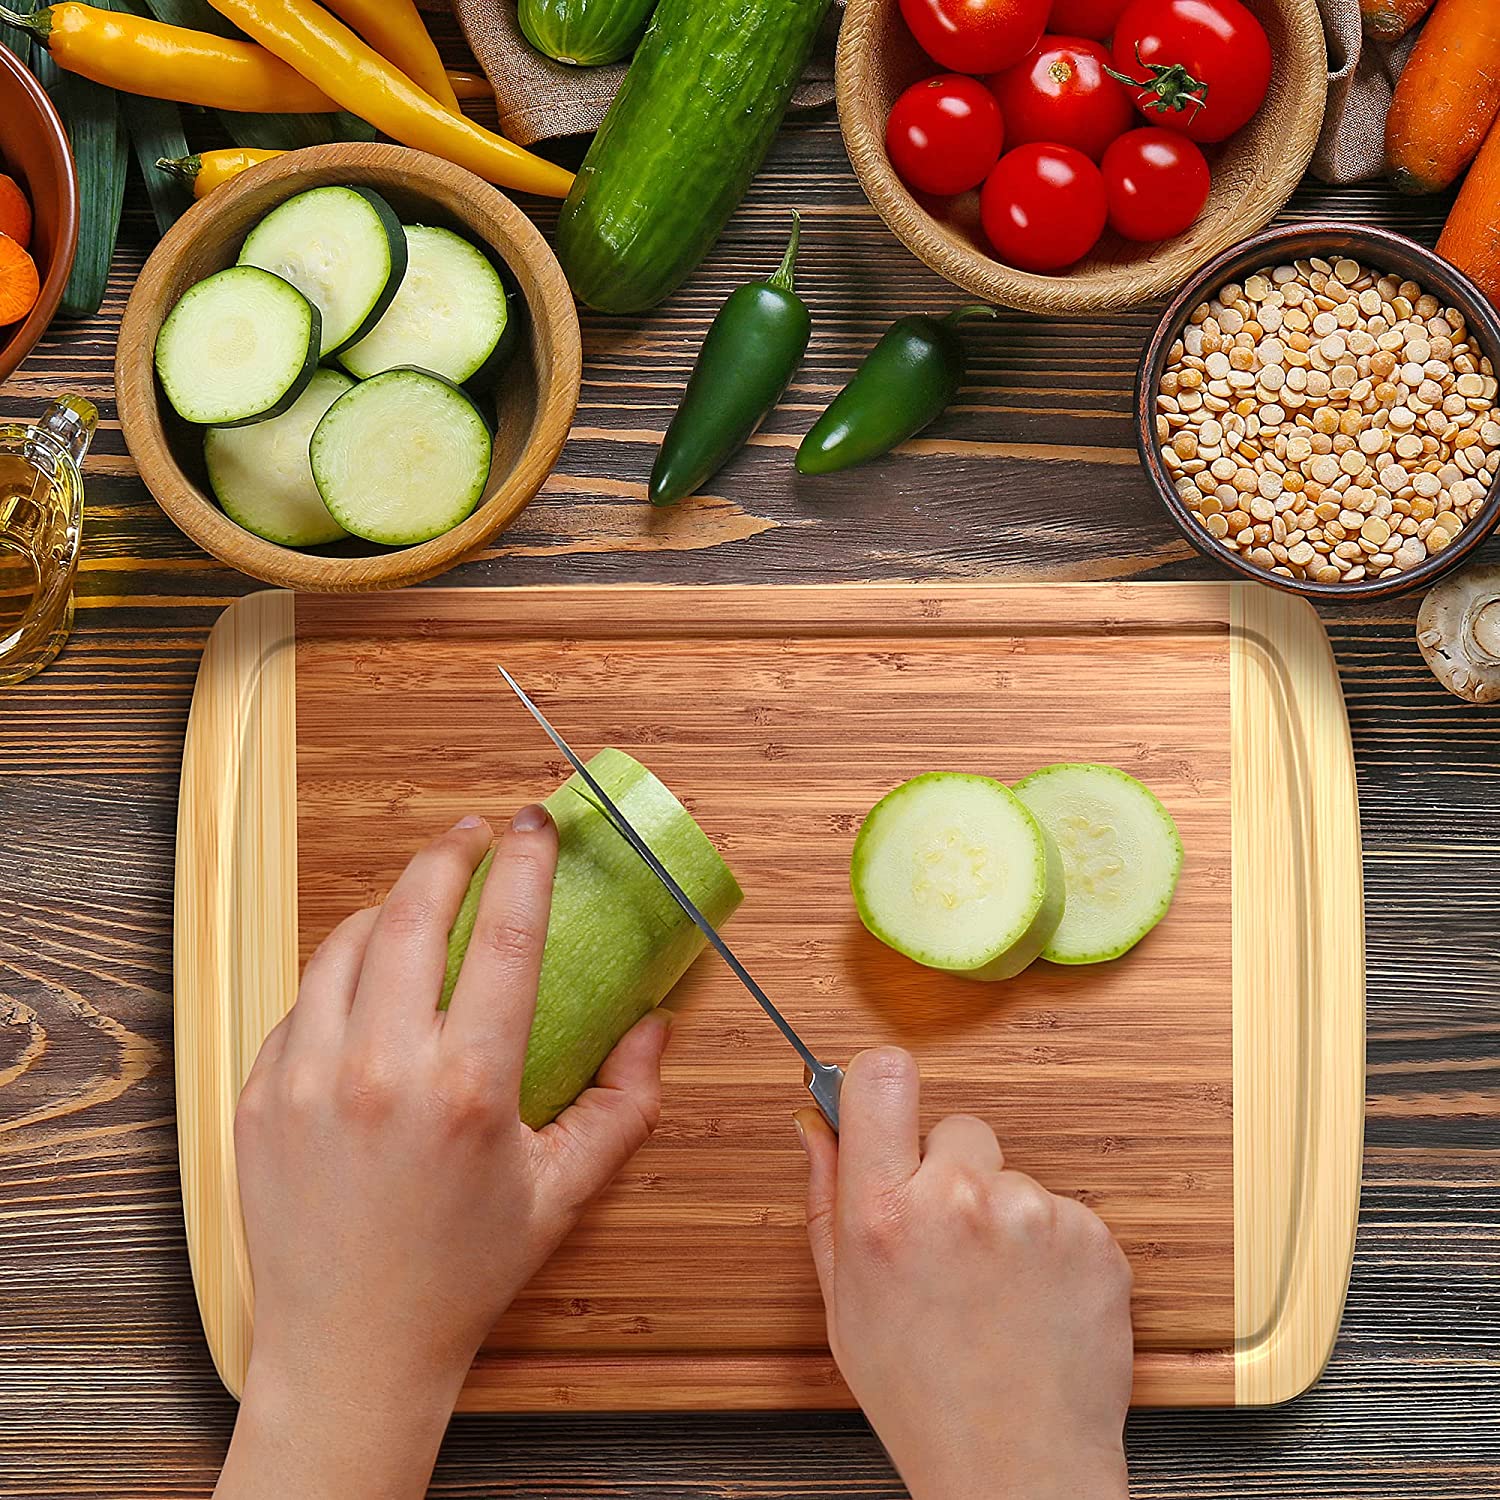 Premium Bamboo Cutting Board Durable & Sustainable for Kitchen Cooking